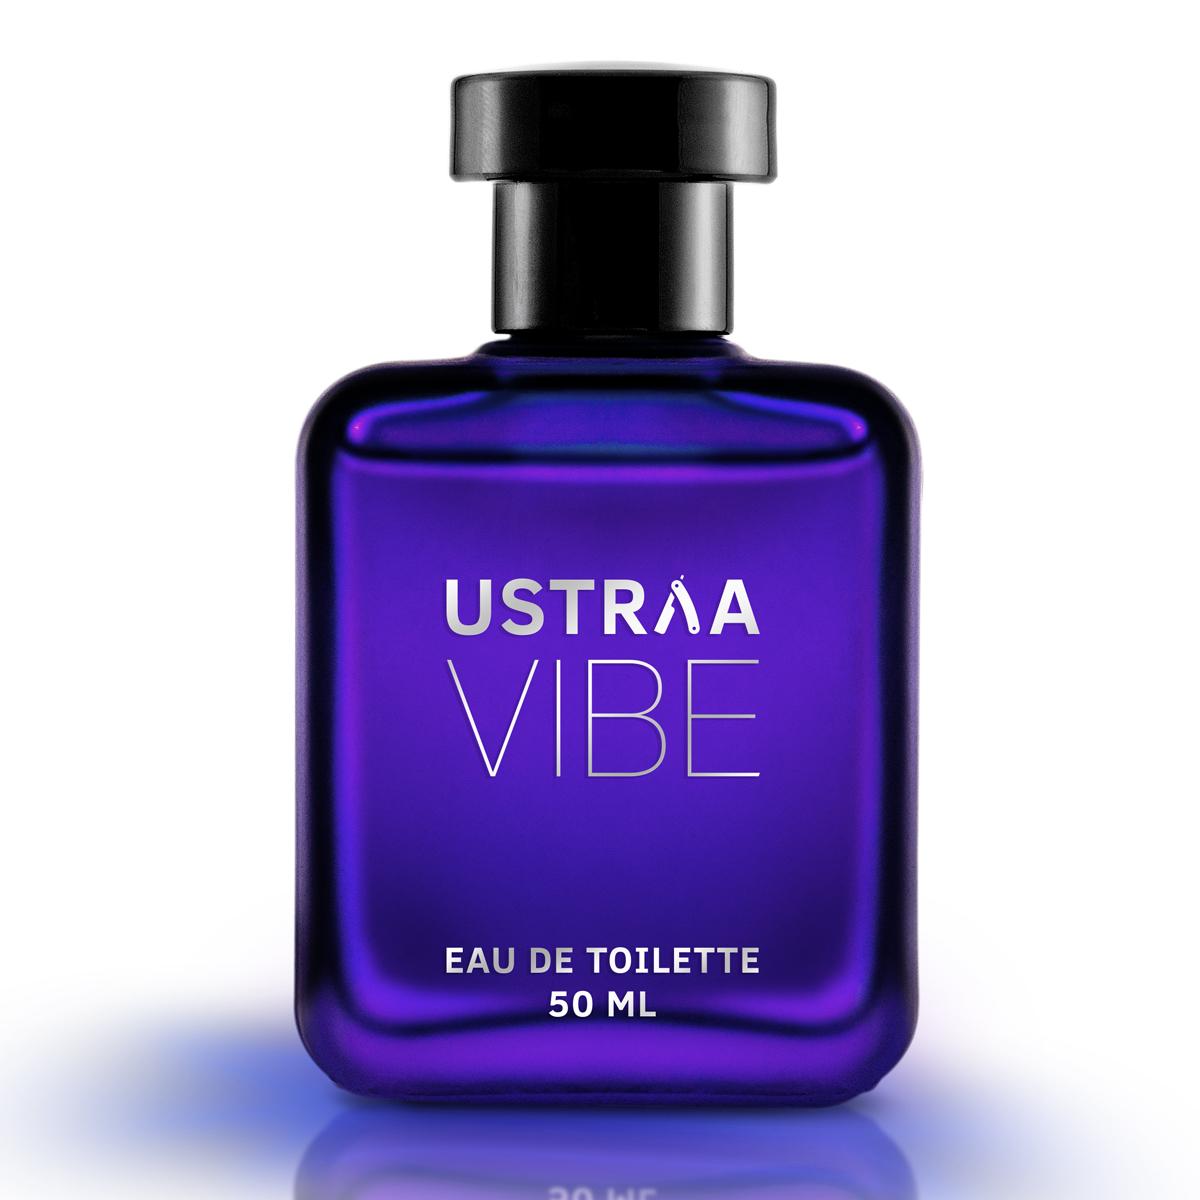 Ustraa Vibe Perfume for Men Fragrance that complements your vibe